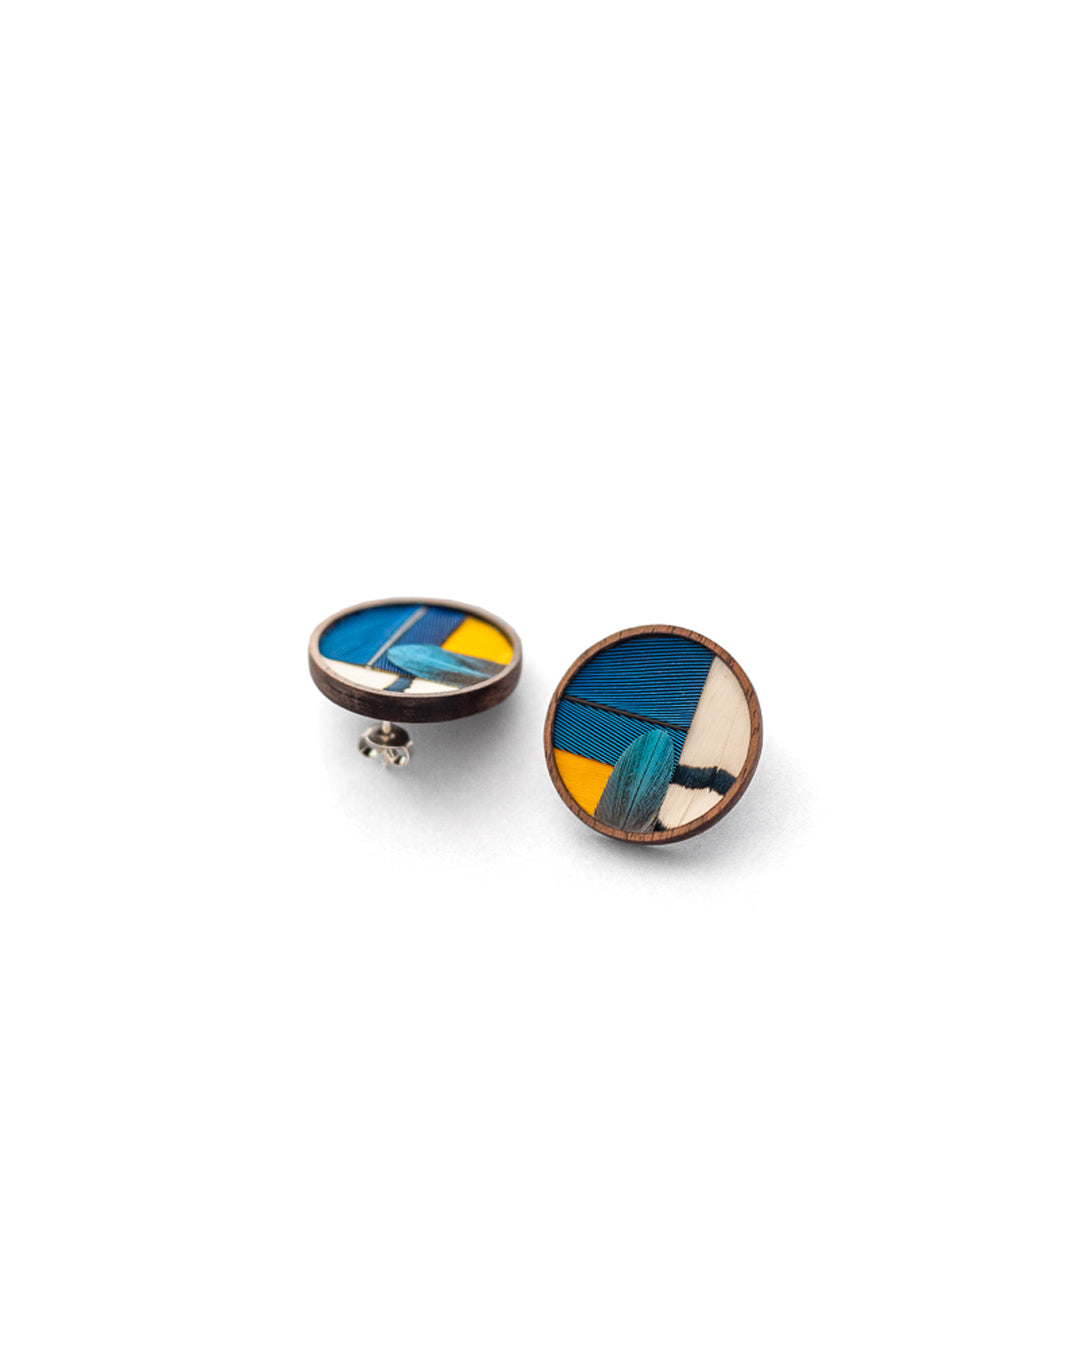 Lucia Fiore - Theo earrings S